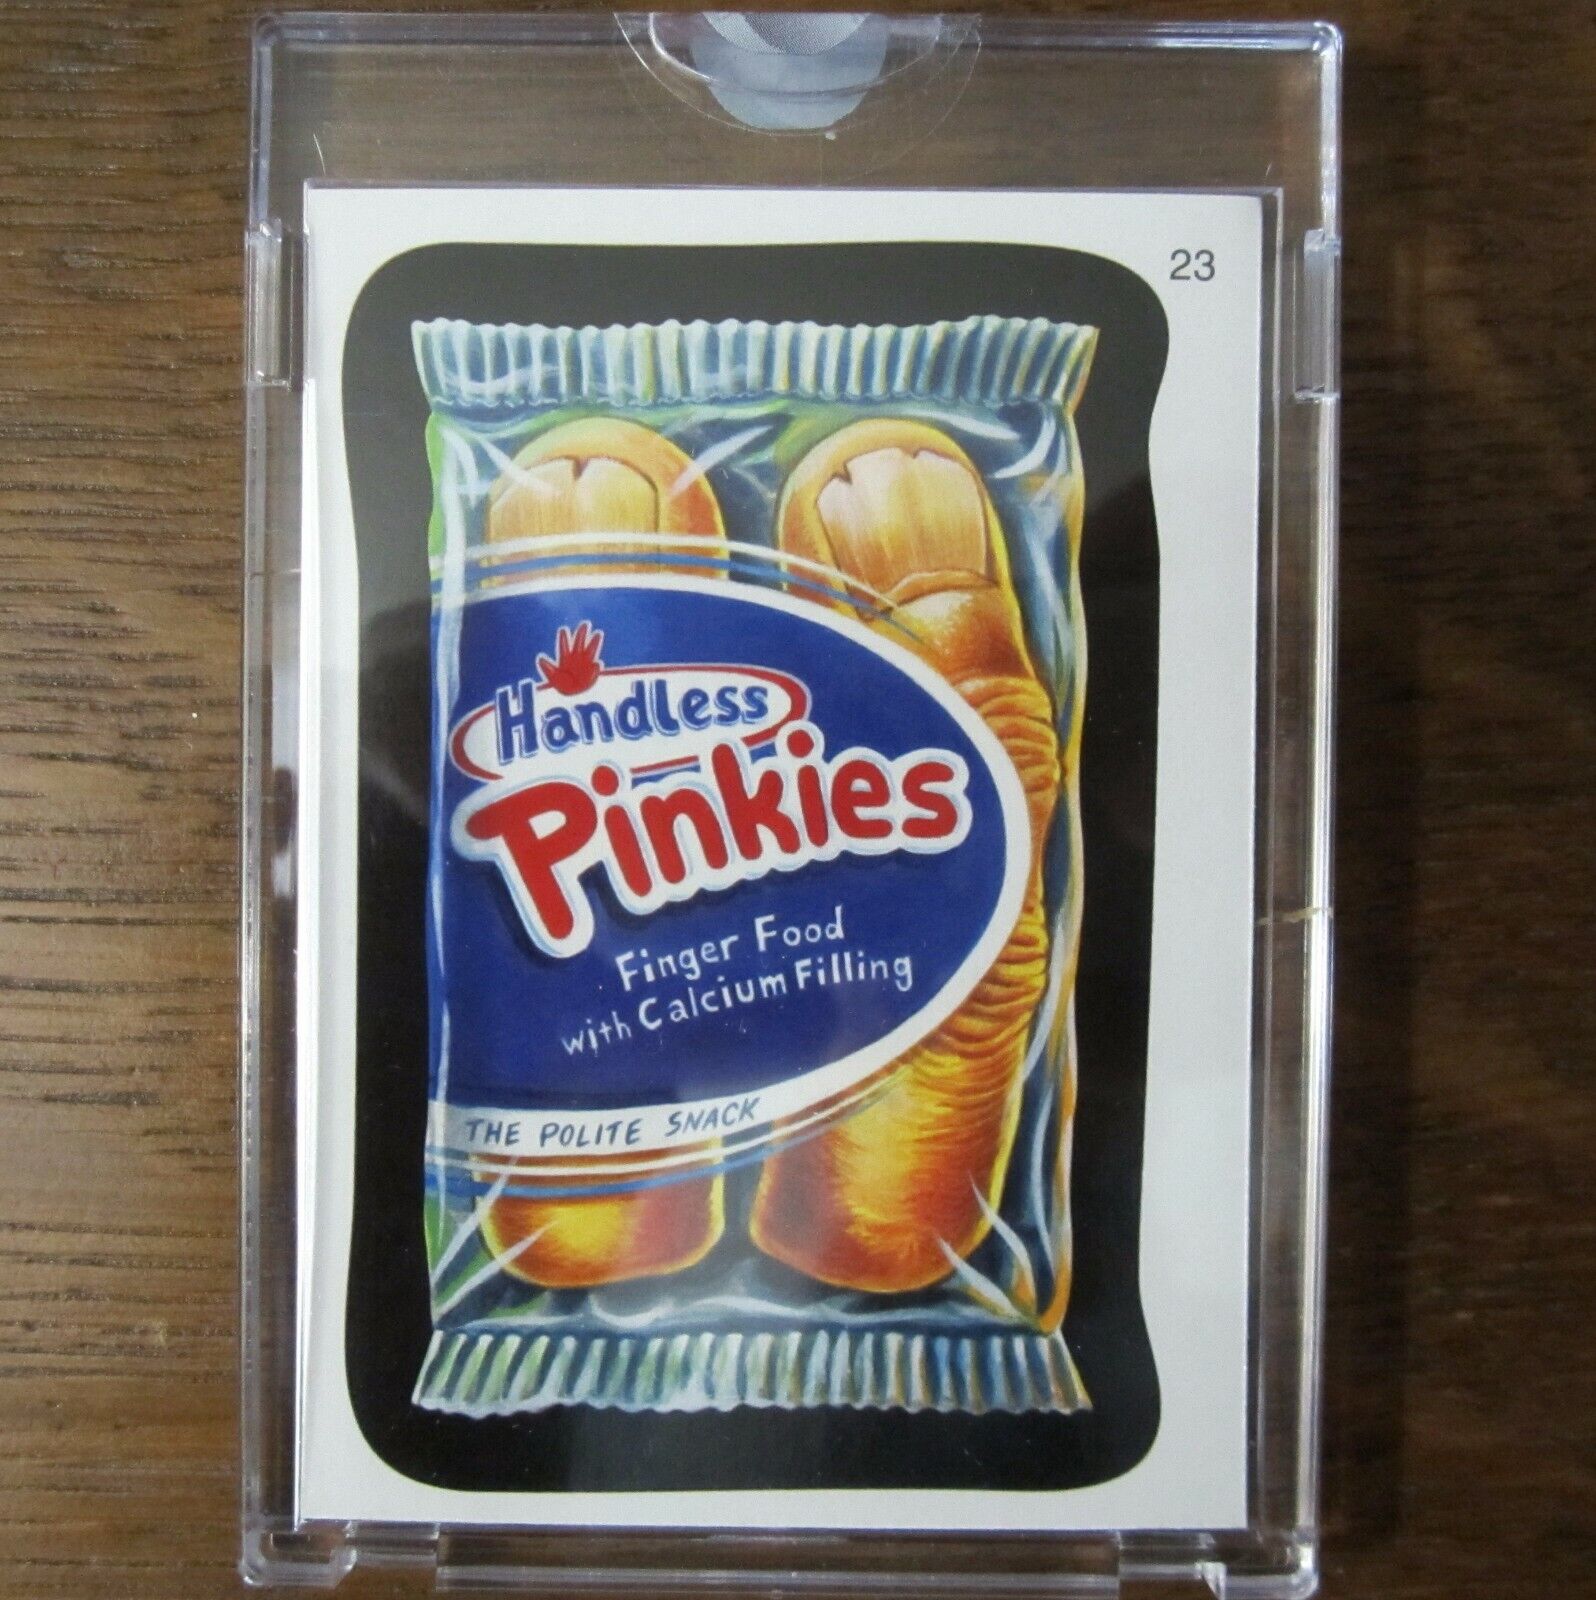 2010 Topps ANS 7 WACKY PACKAGES HANDLESS PINKIES Proof Card Vault TWINKIES KISS